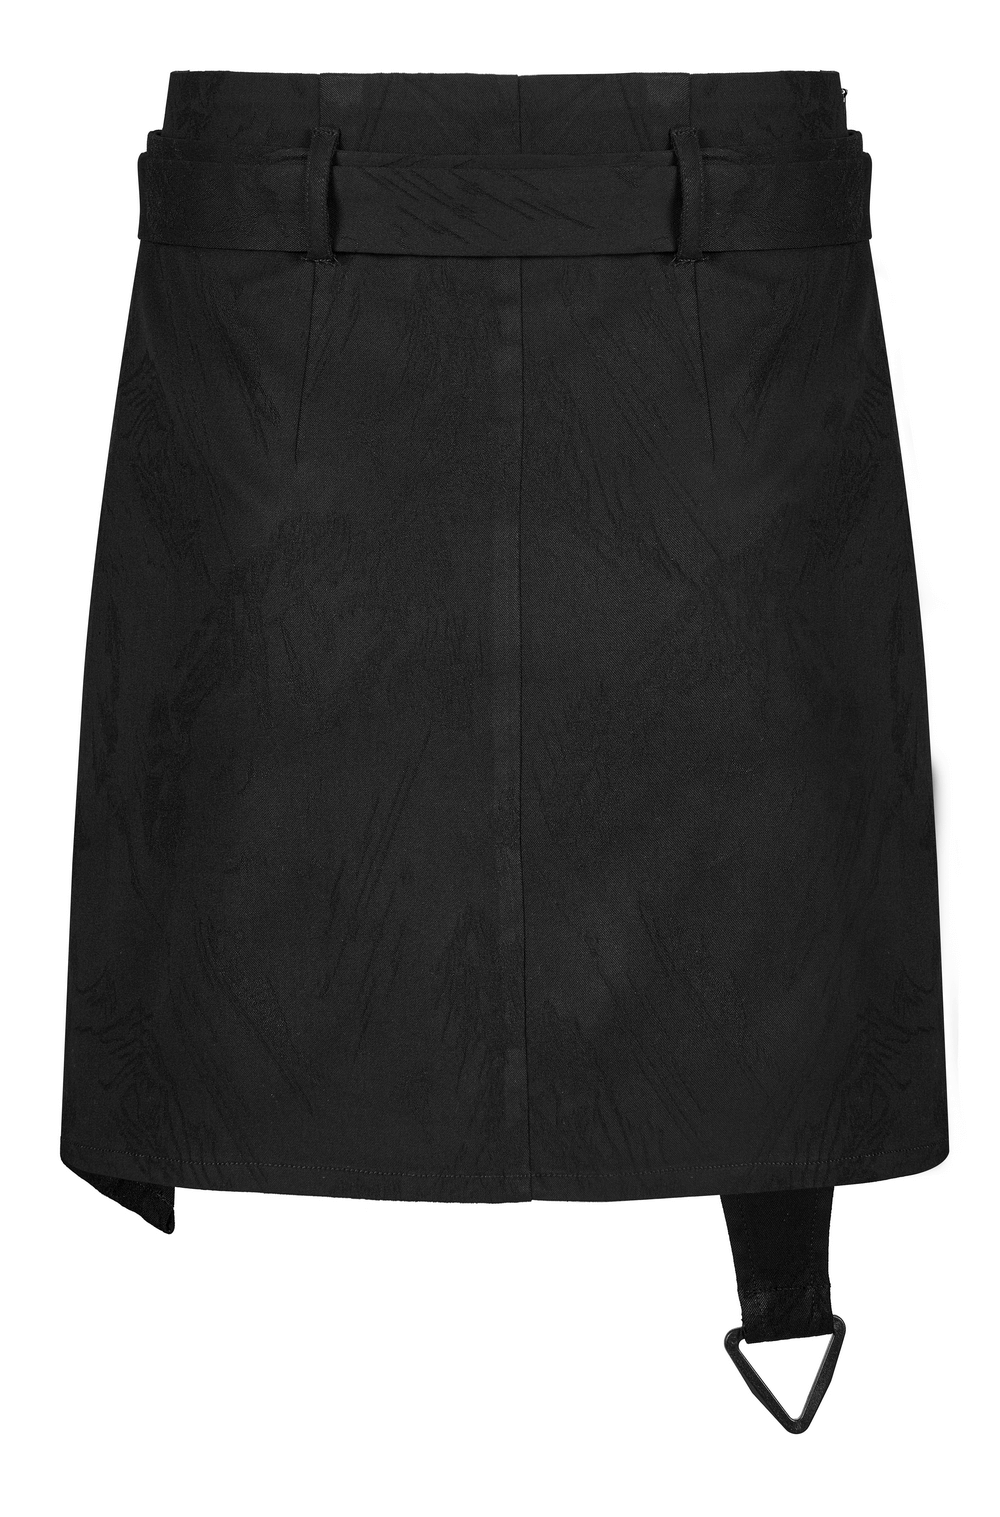 Chic Black Asymmetric Skirt with Lace-Up Accents